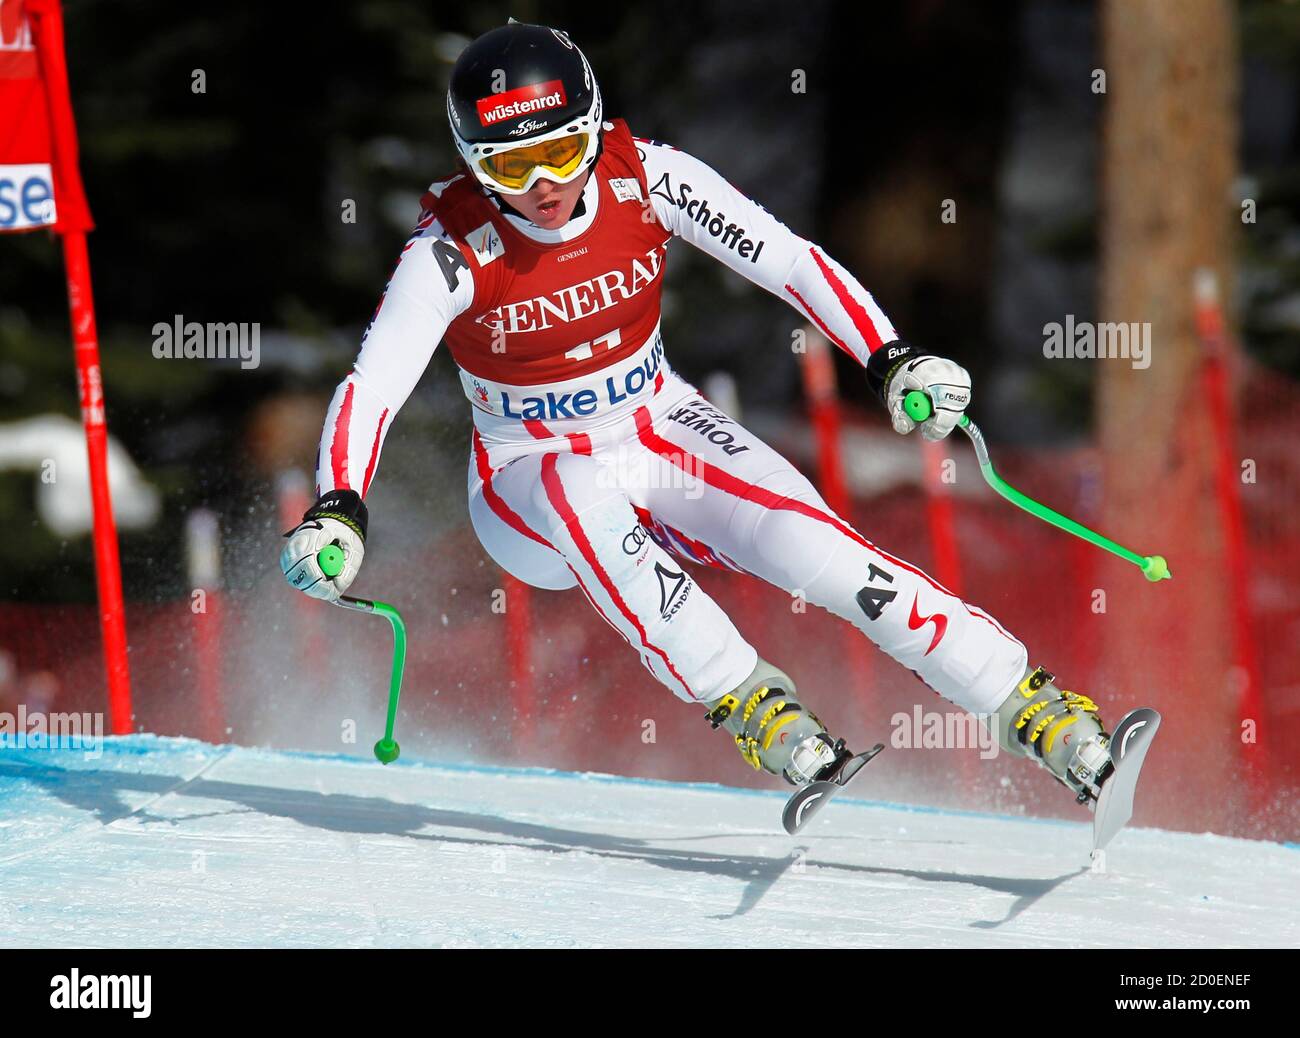 Elisabeth Goergl of Austria makes a turn during the Women's World Cup downhill alpine skiing race in Lake Louise, Alberta December 2, 2011.  REUTERS/Mike Blake   (CANADA - Tags: SPORT SKIING) Stock Photo